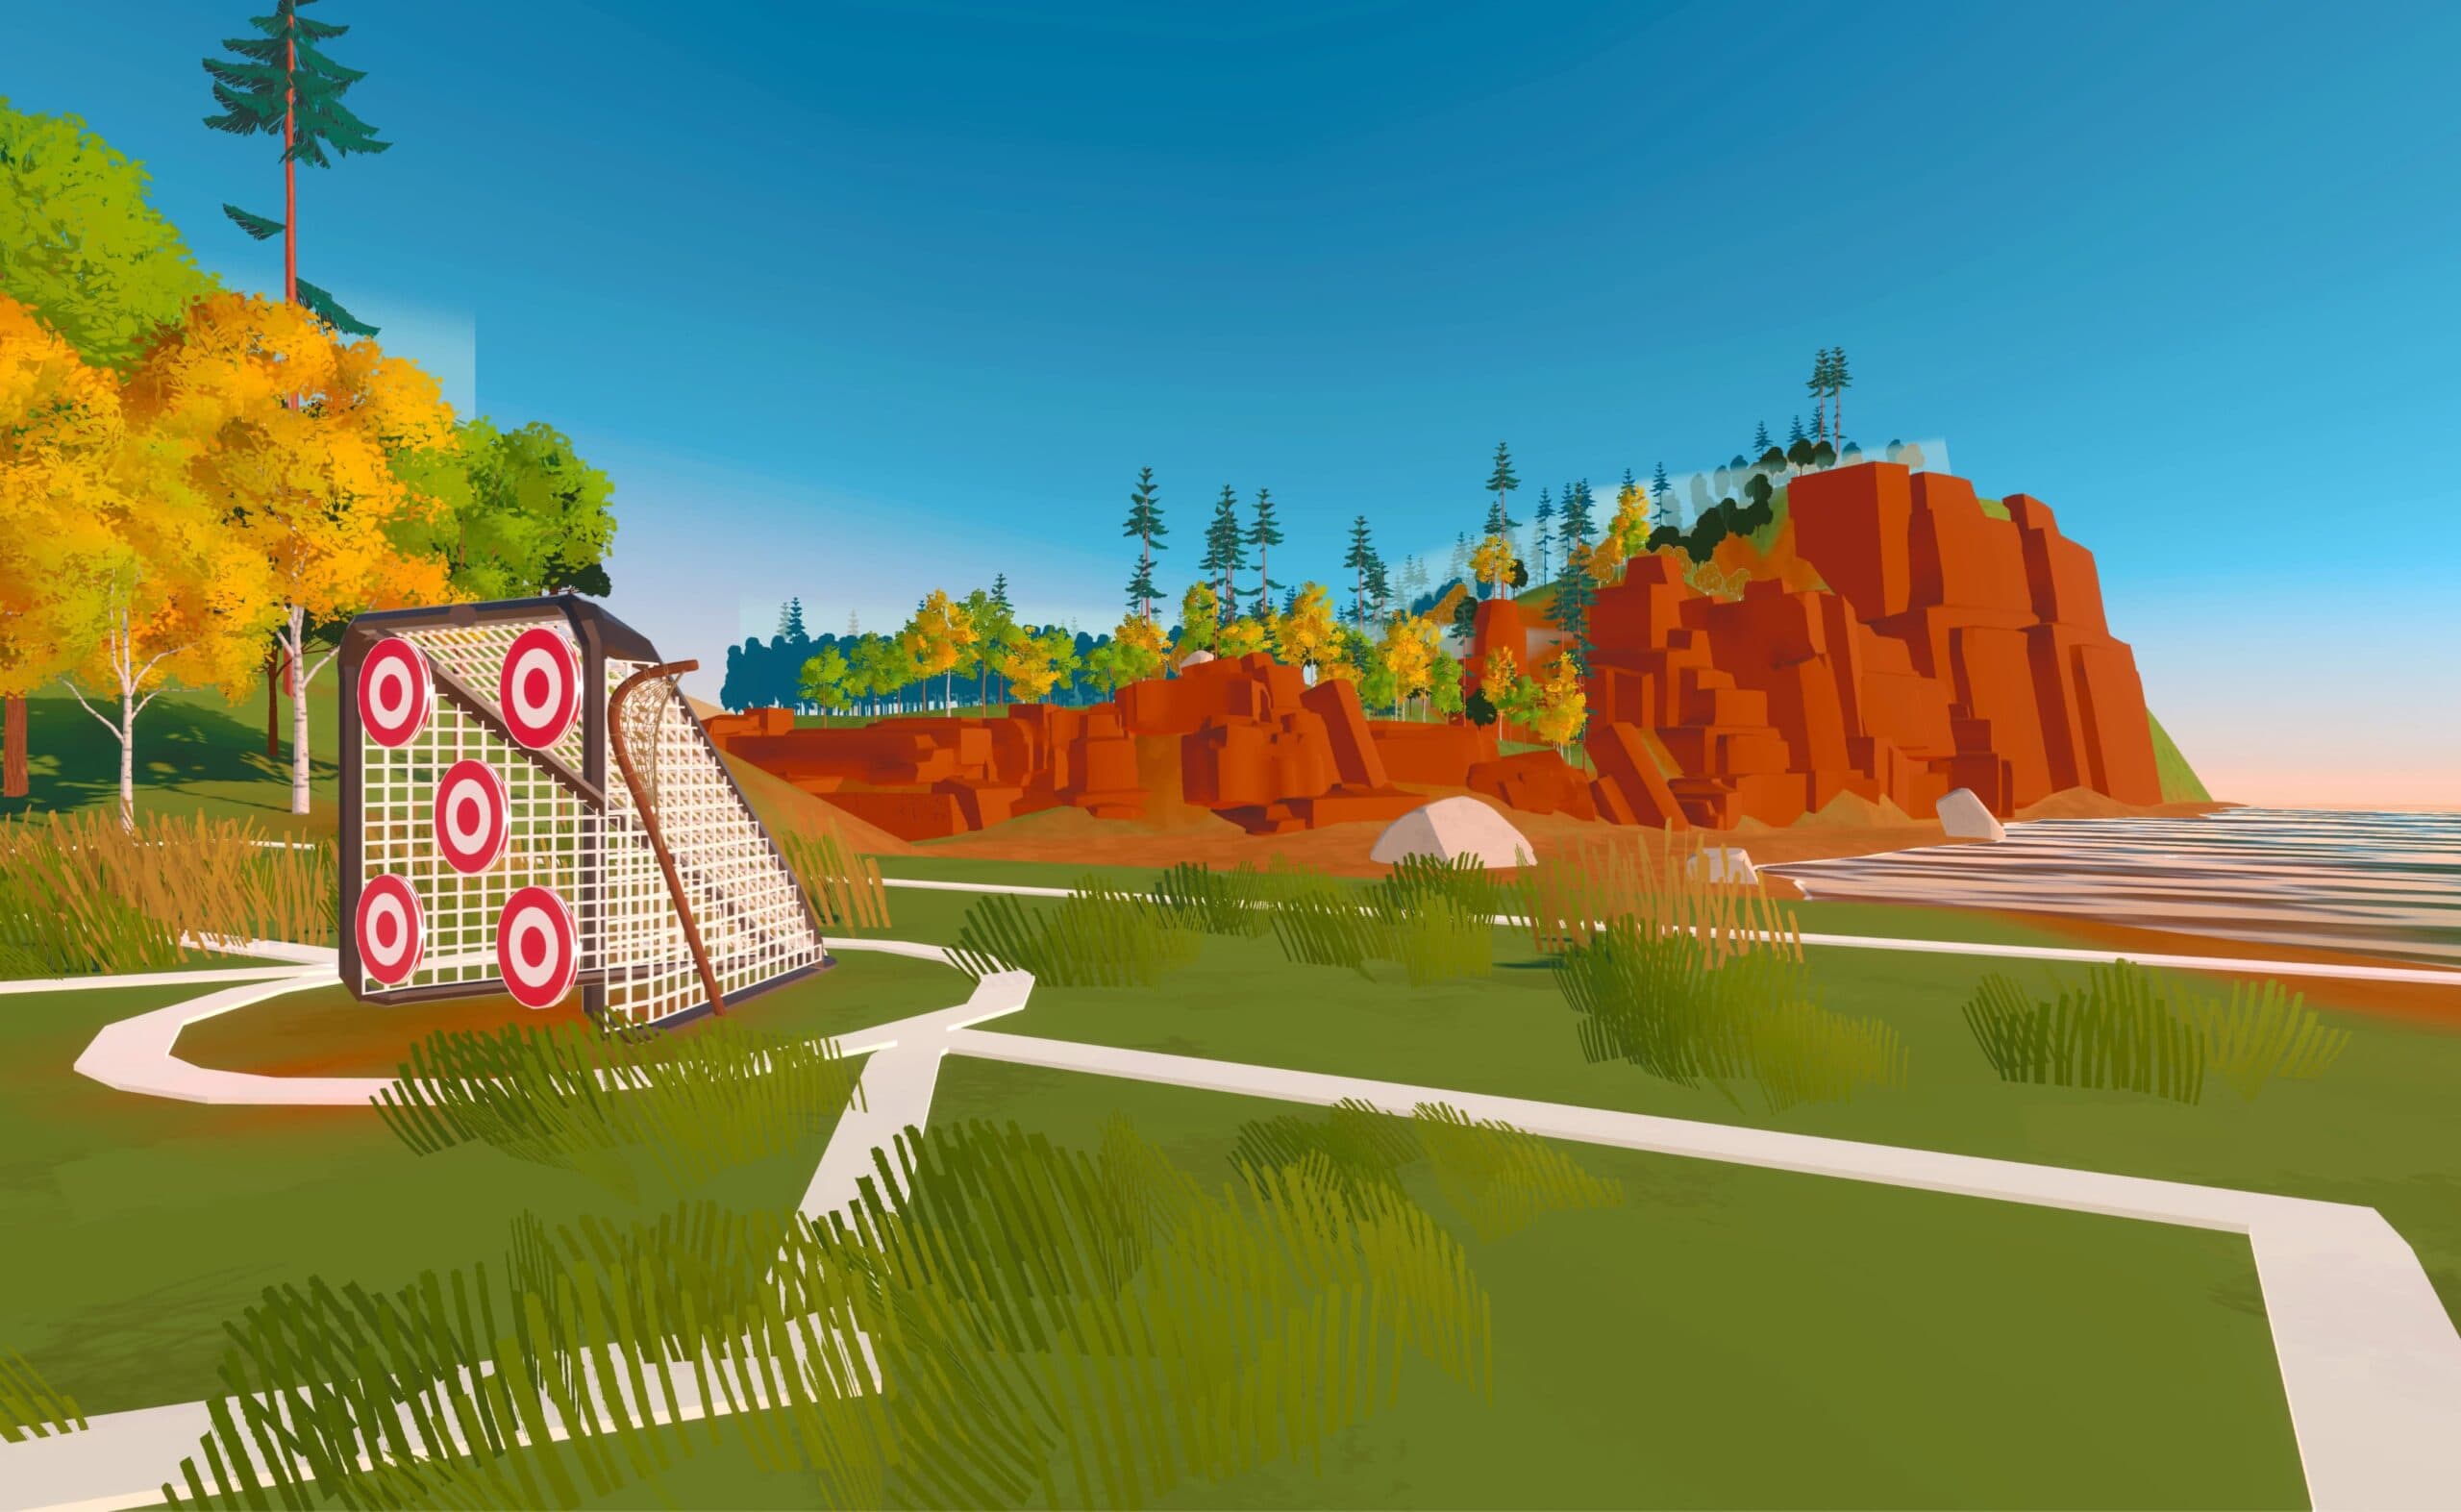 A screenshot from the VR lacrosse experience is shown.